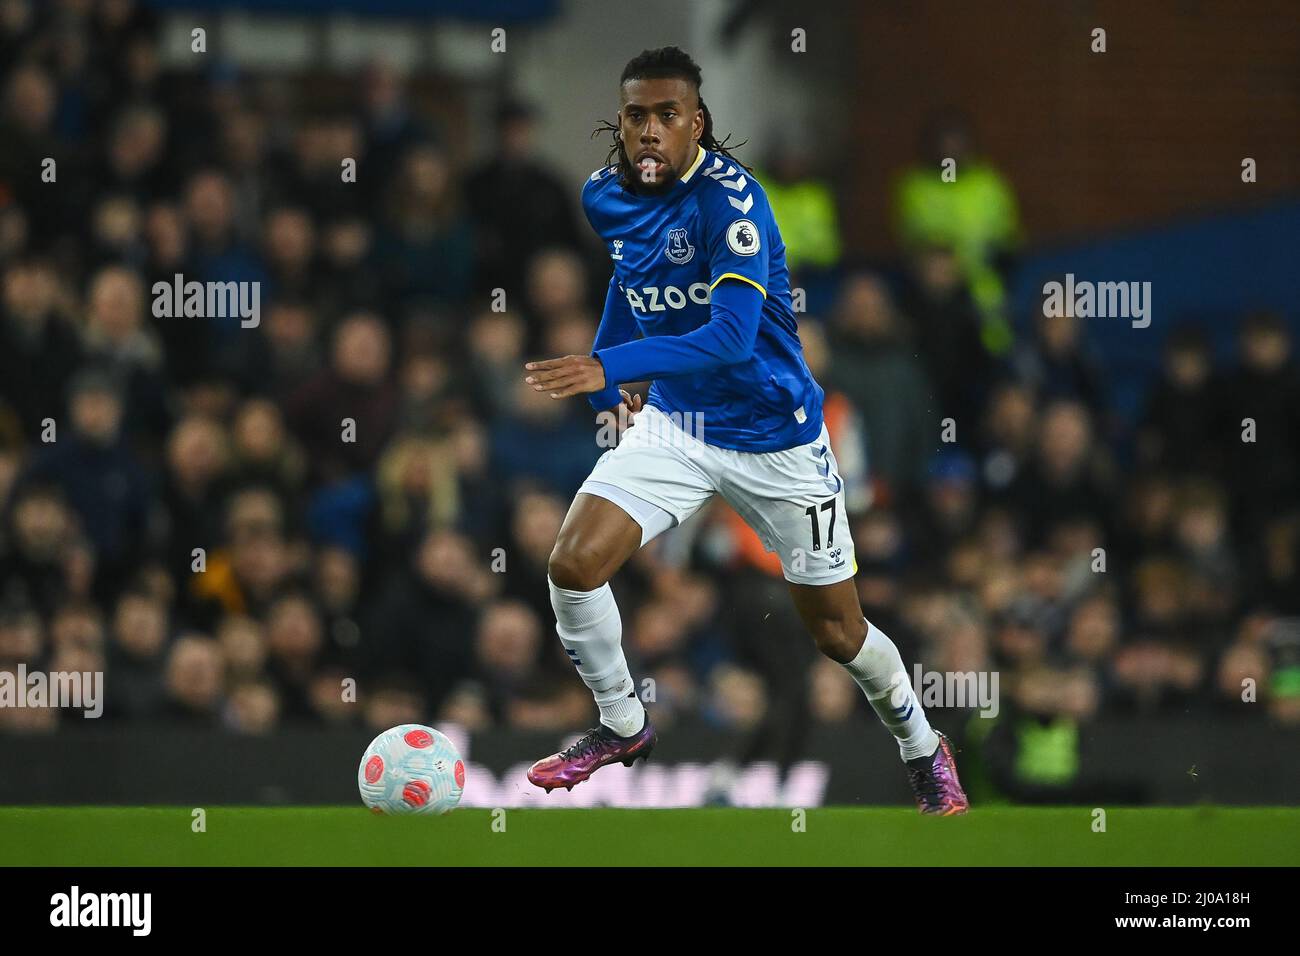 Alex Iwobi #17 of Everton in action during the game Stock Photo